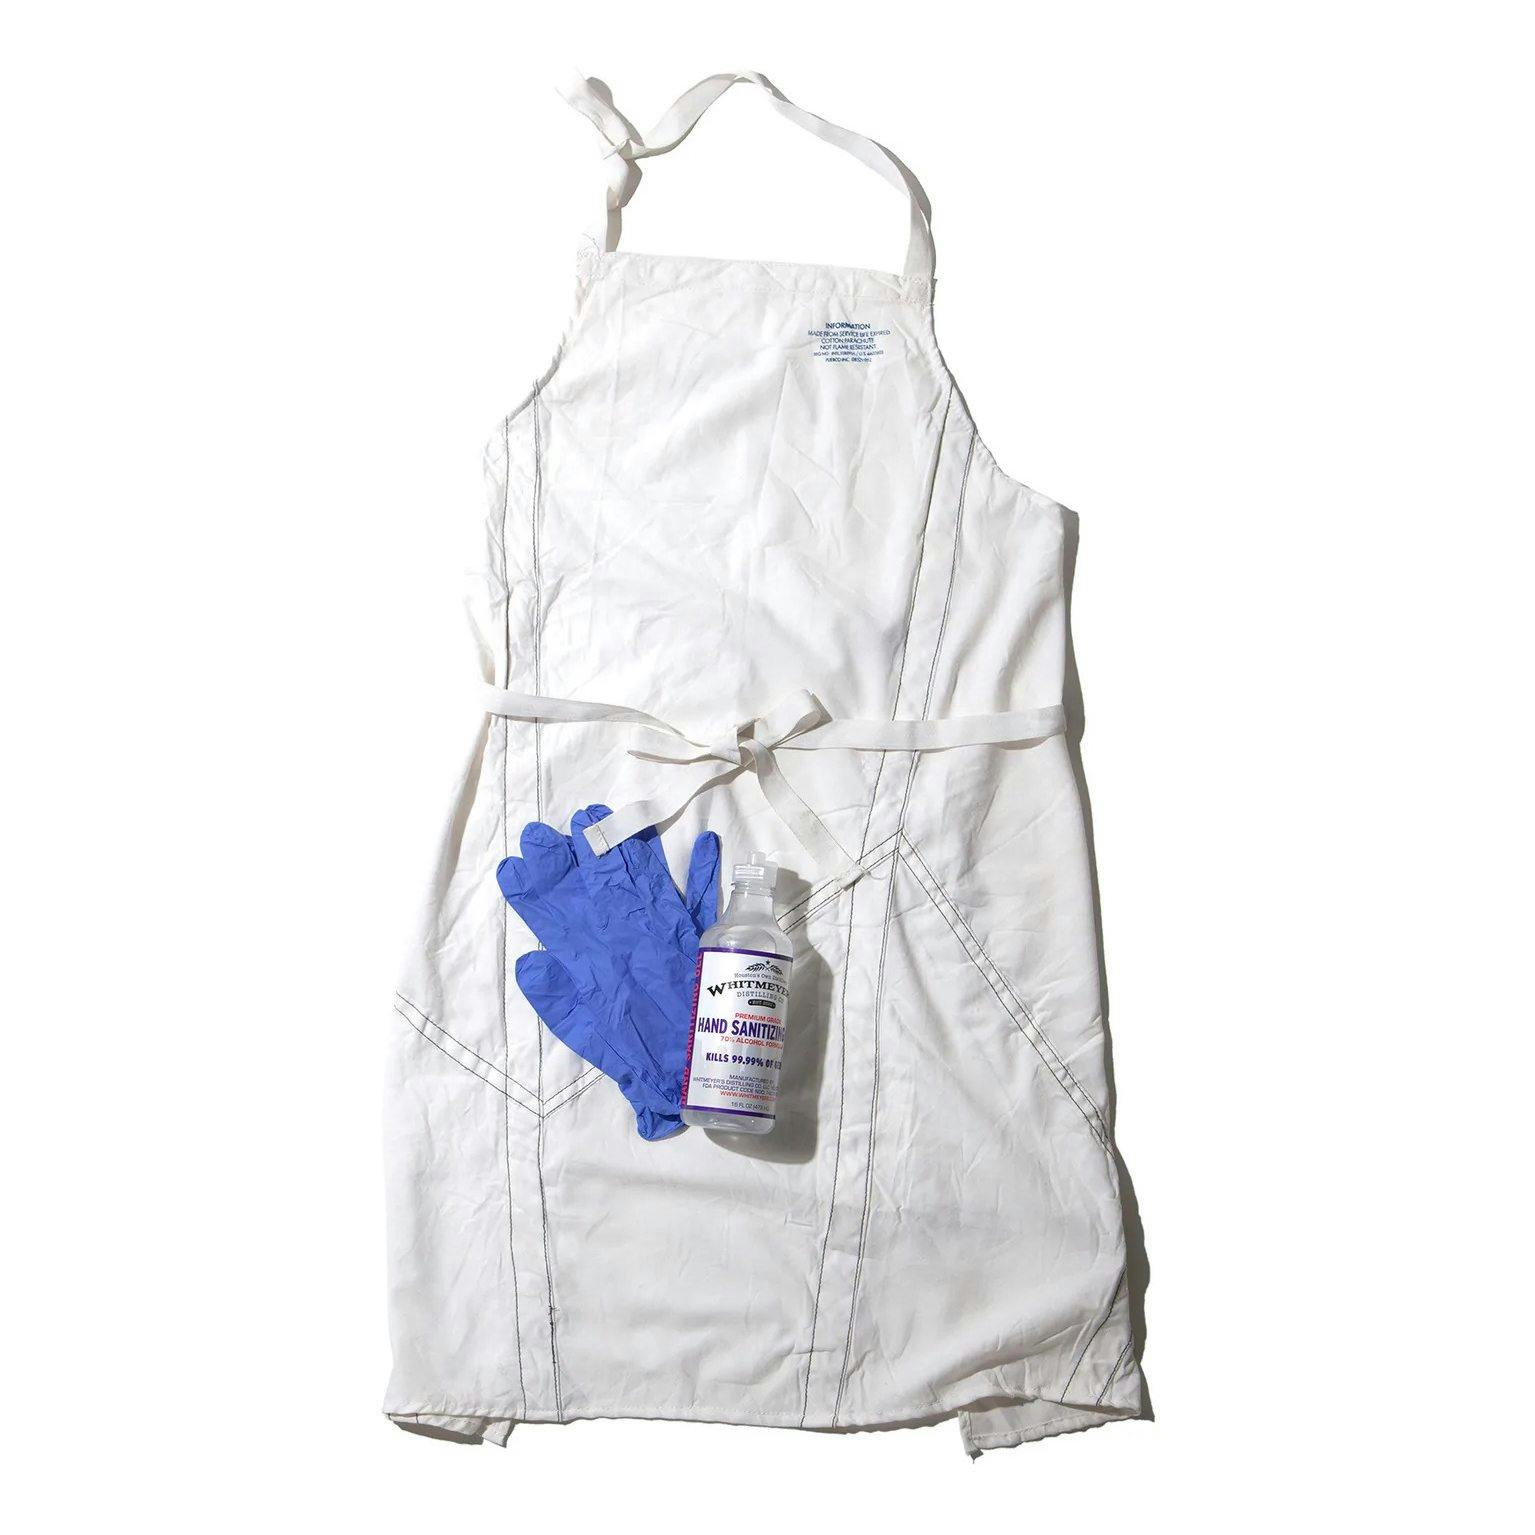 Expired Parachute Material Standard Chef Apron